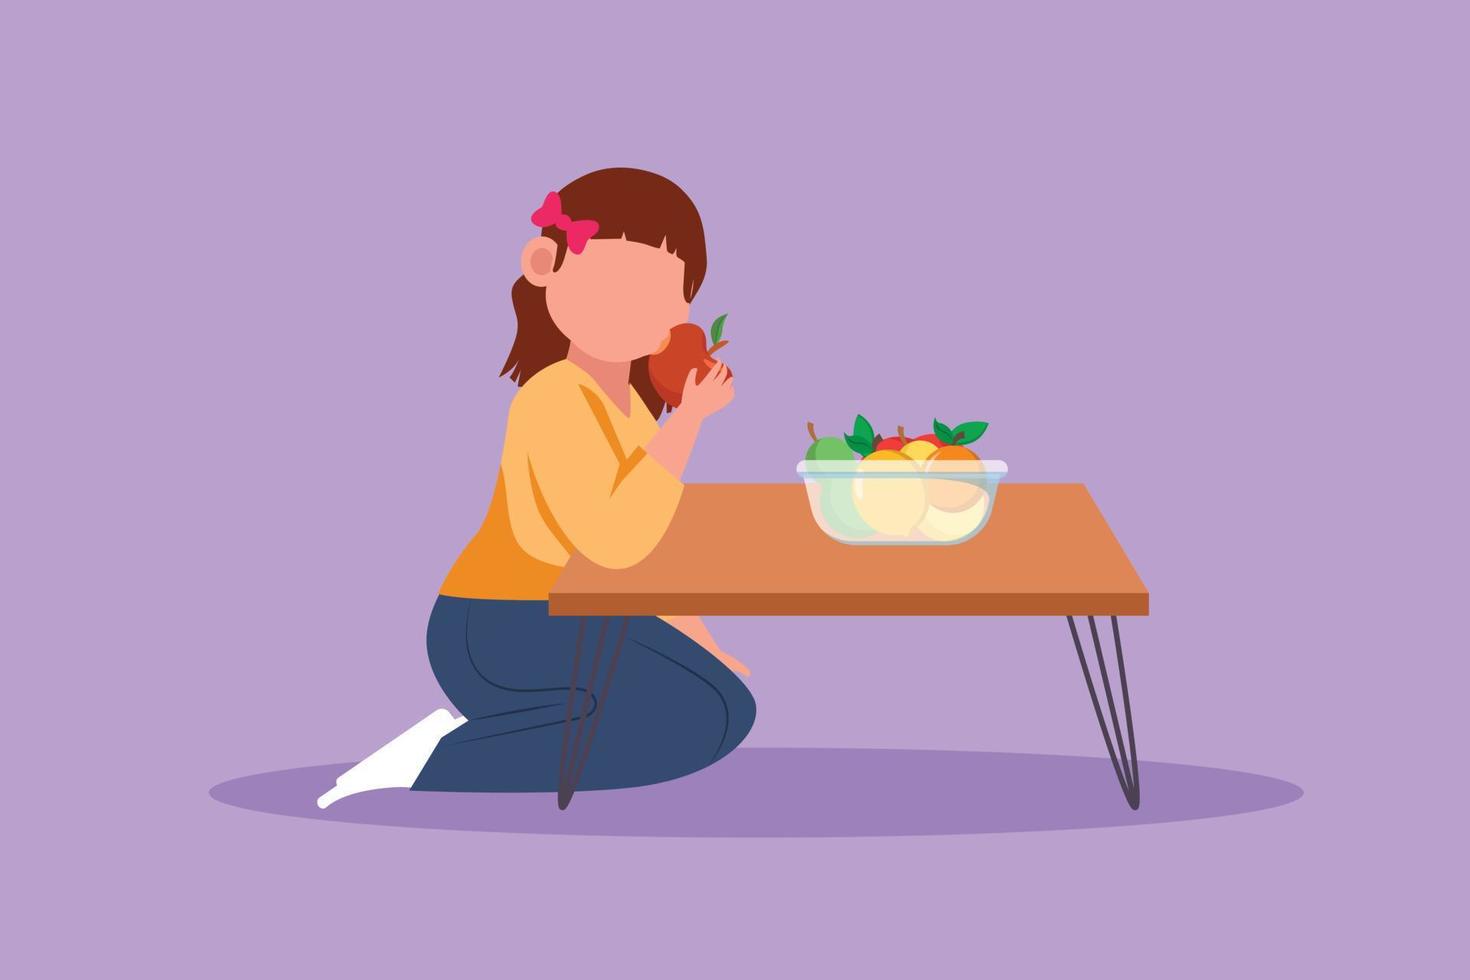 Character flat drawing beautiful little girl sitting near table and eating apple. Orange and mango in bowl placed on table at home. Healthy fruit and food for kids. Cartoon design vector illustration